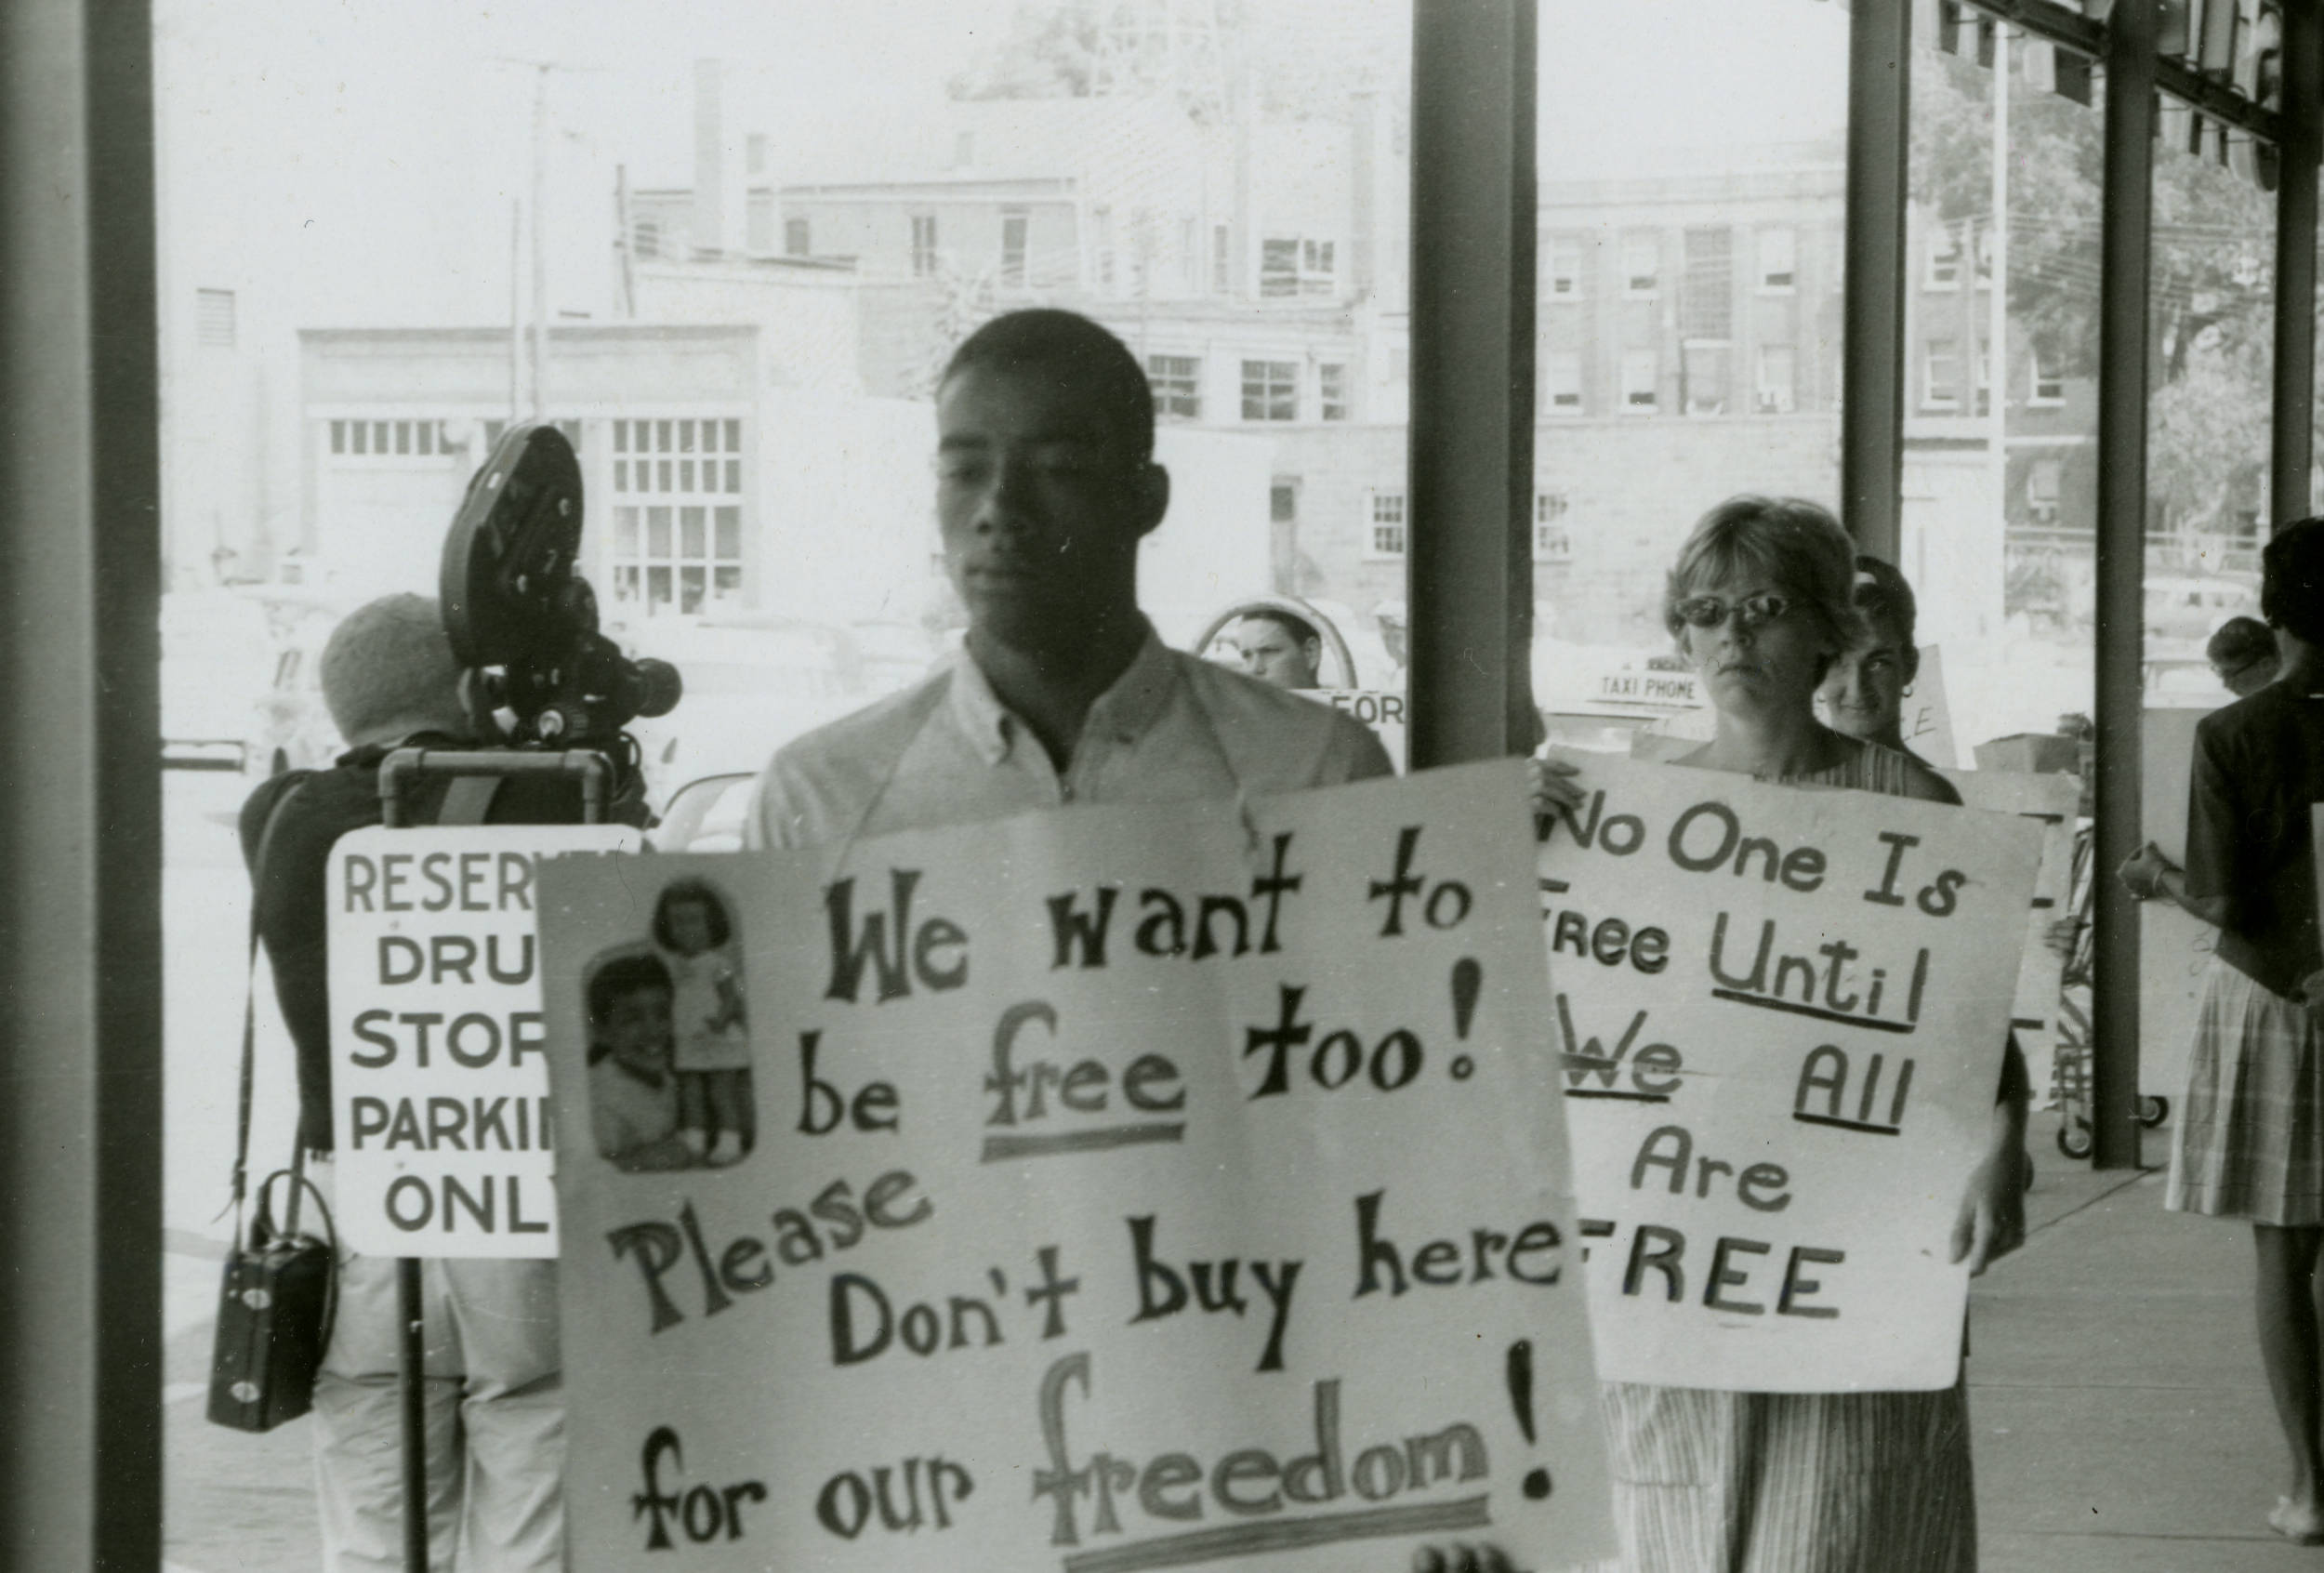 A group of protestors, both Black and White, holding picket signs and demonstrating